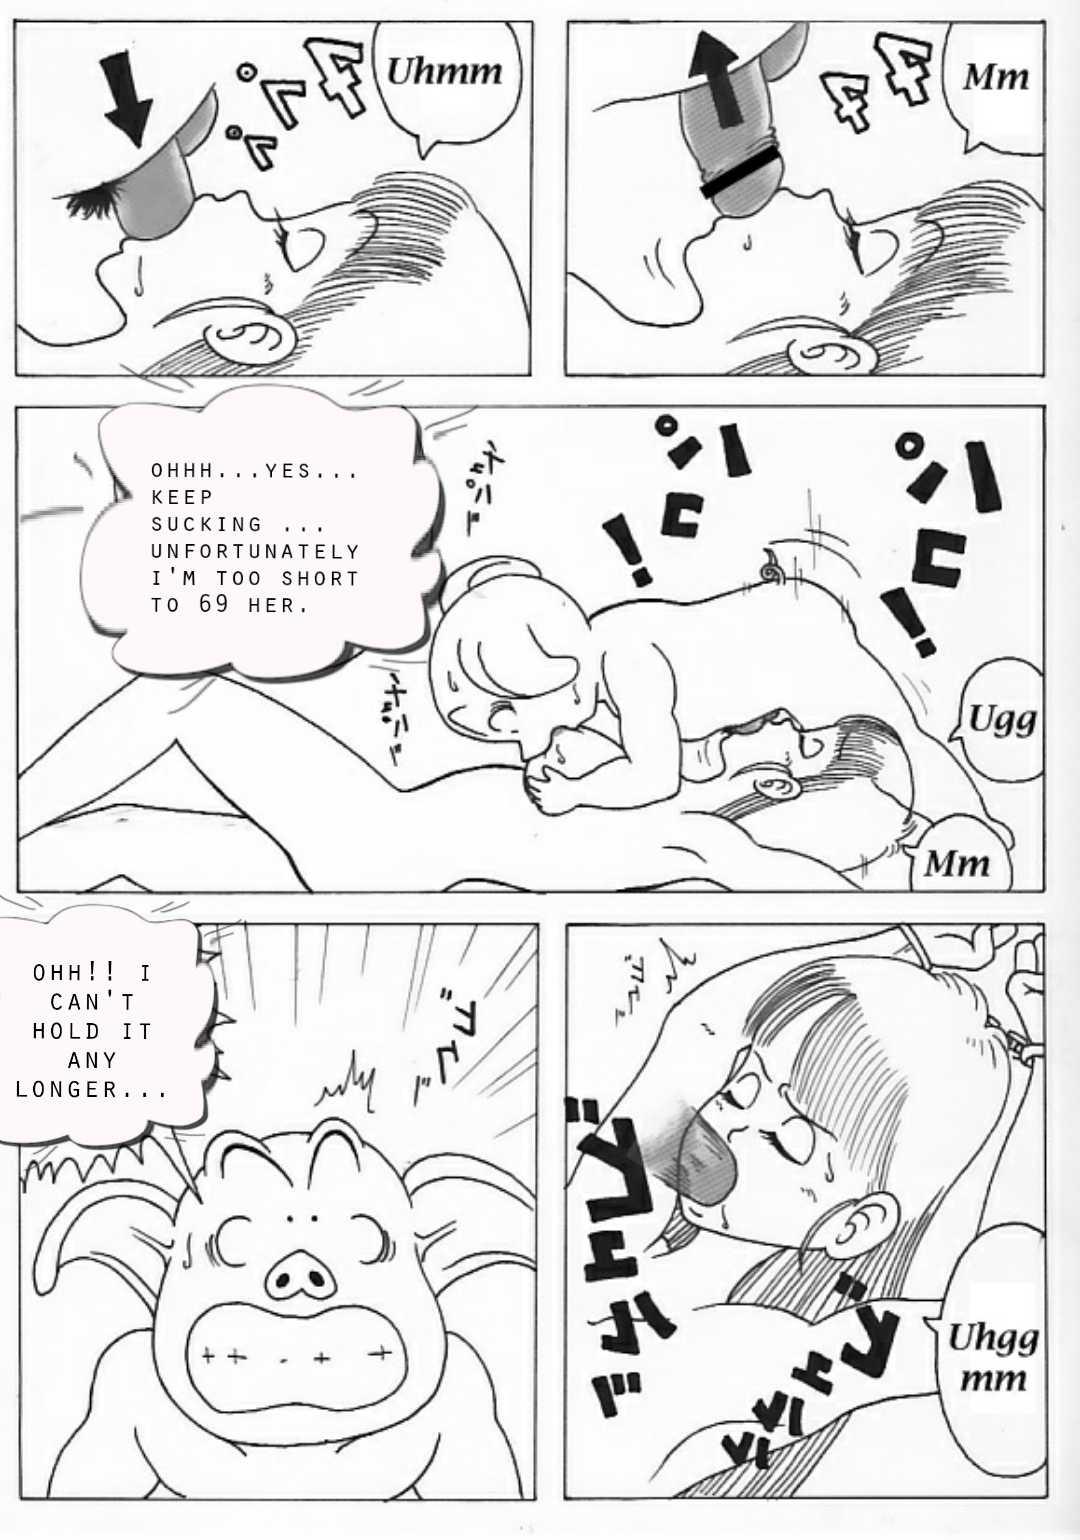 Ejaculation Bulma and Oolong - Dragon ball Adolescente - Page 3